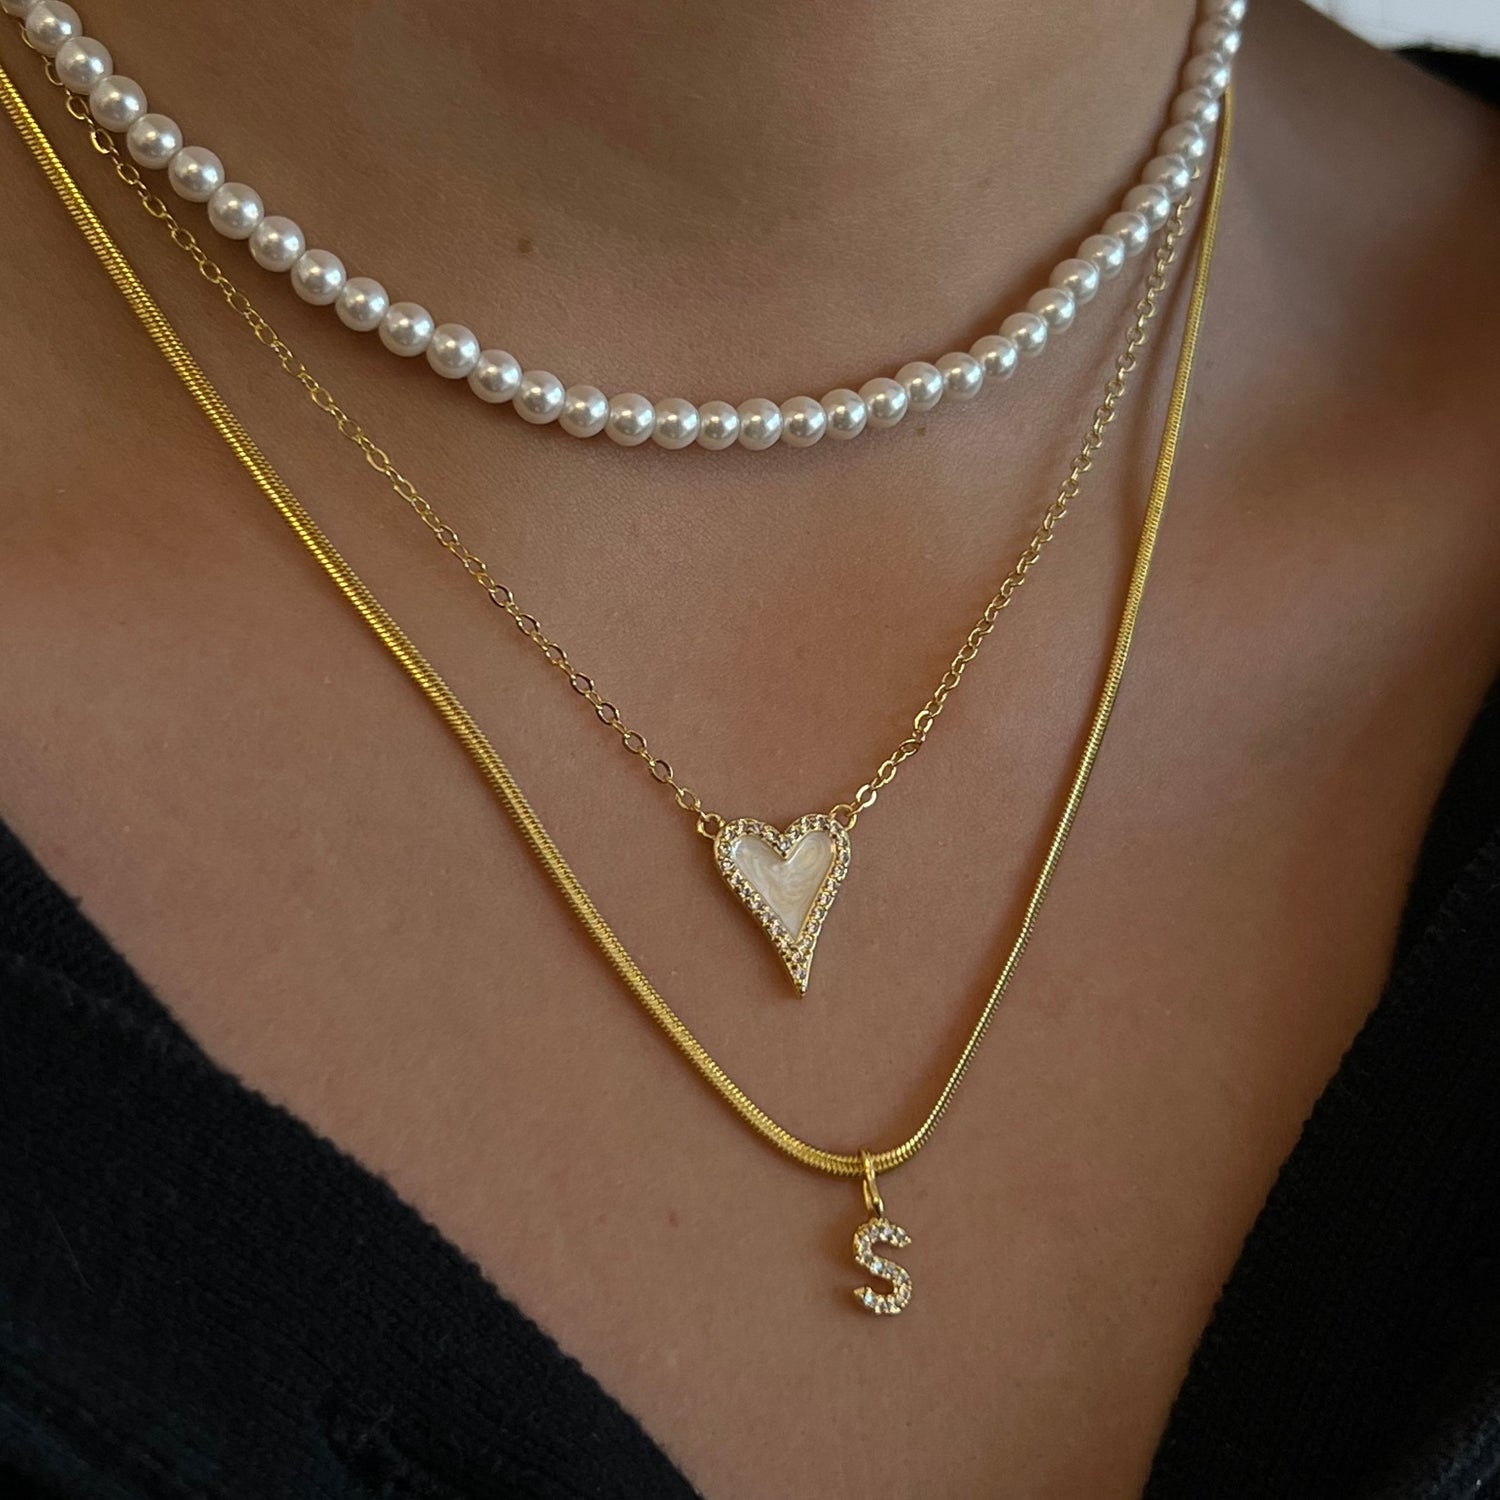 Forever In Love Necklace